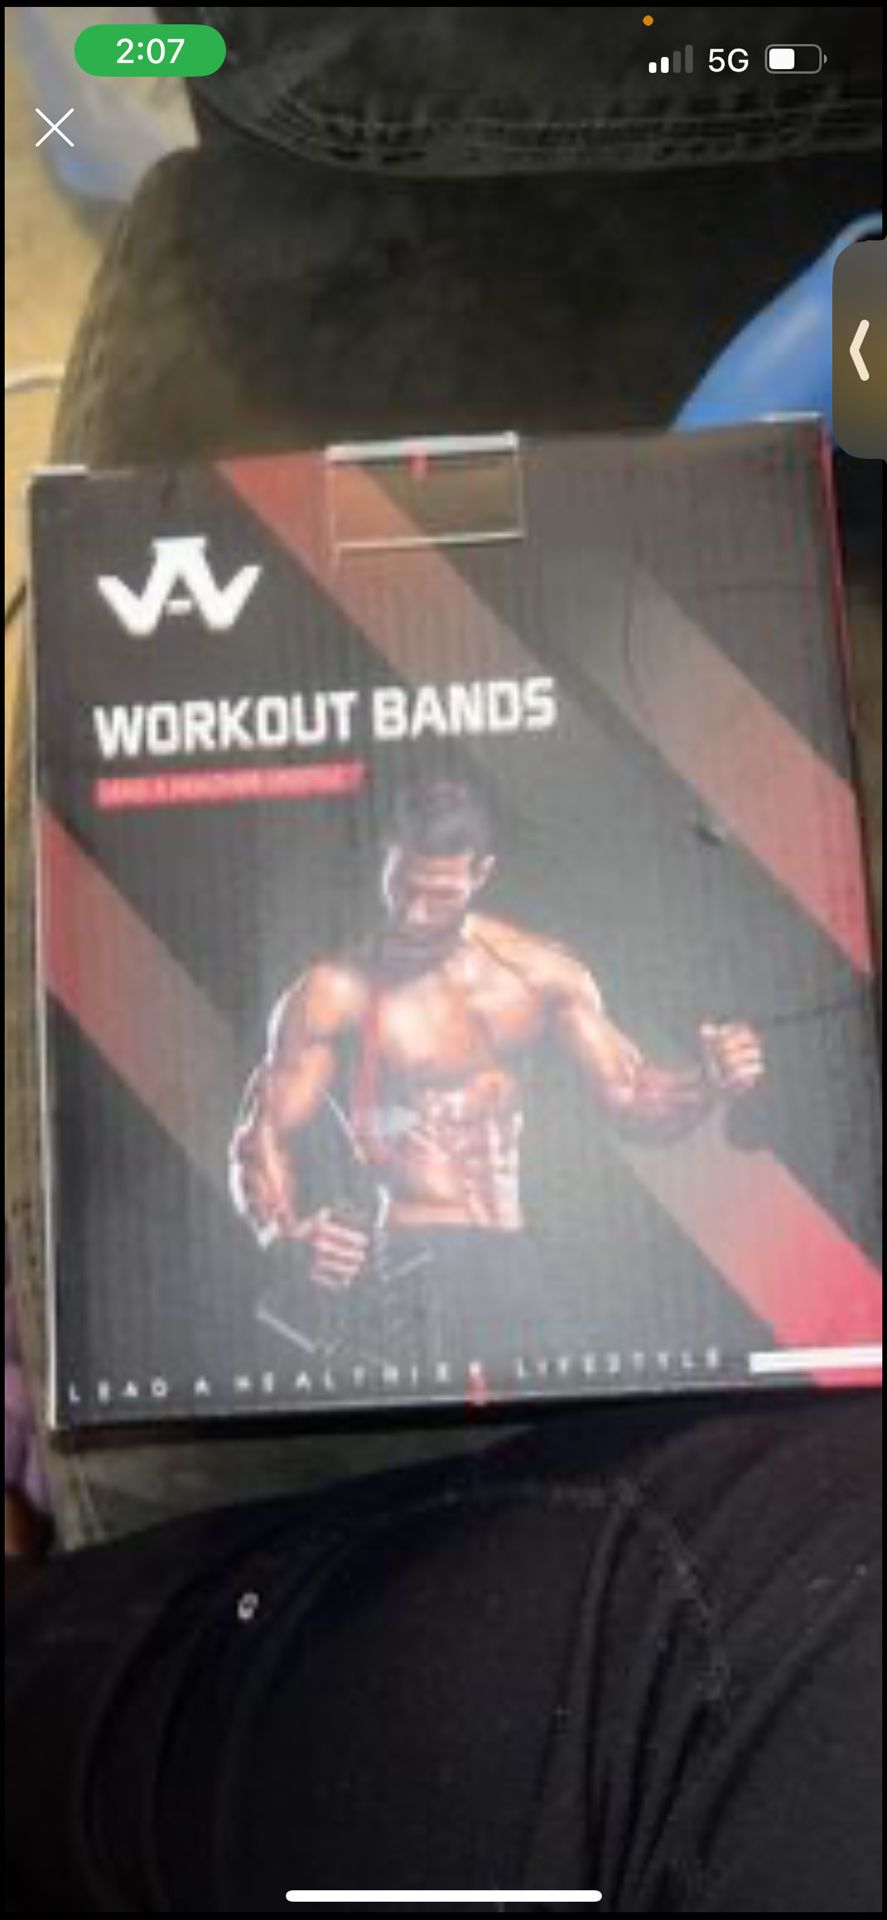 Workout Bands 